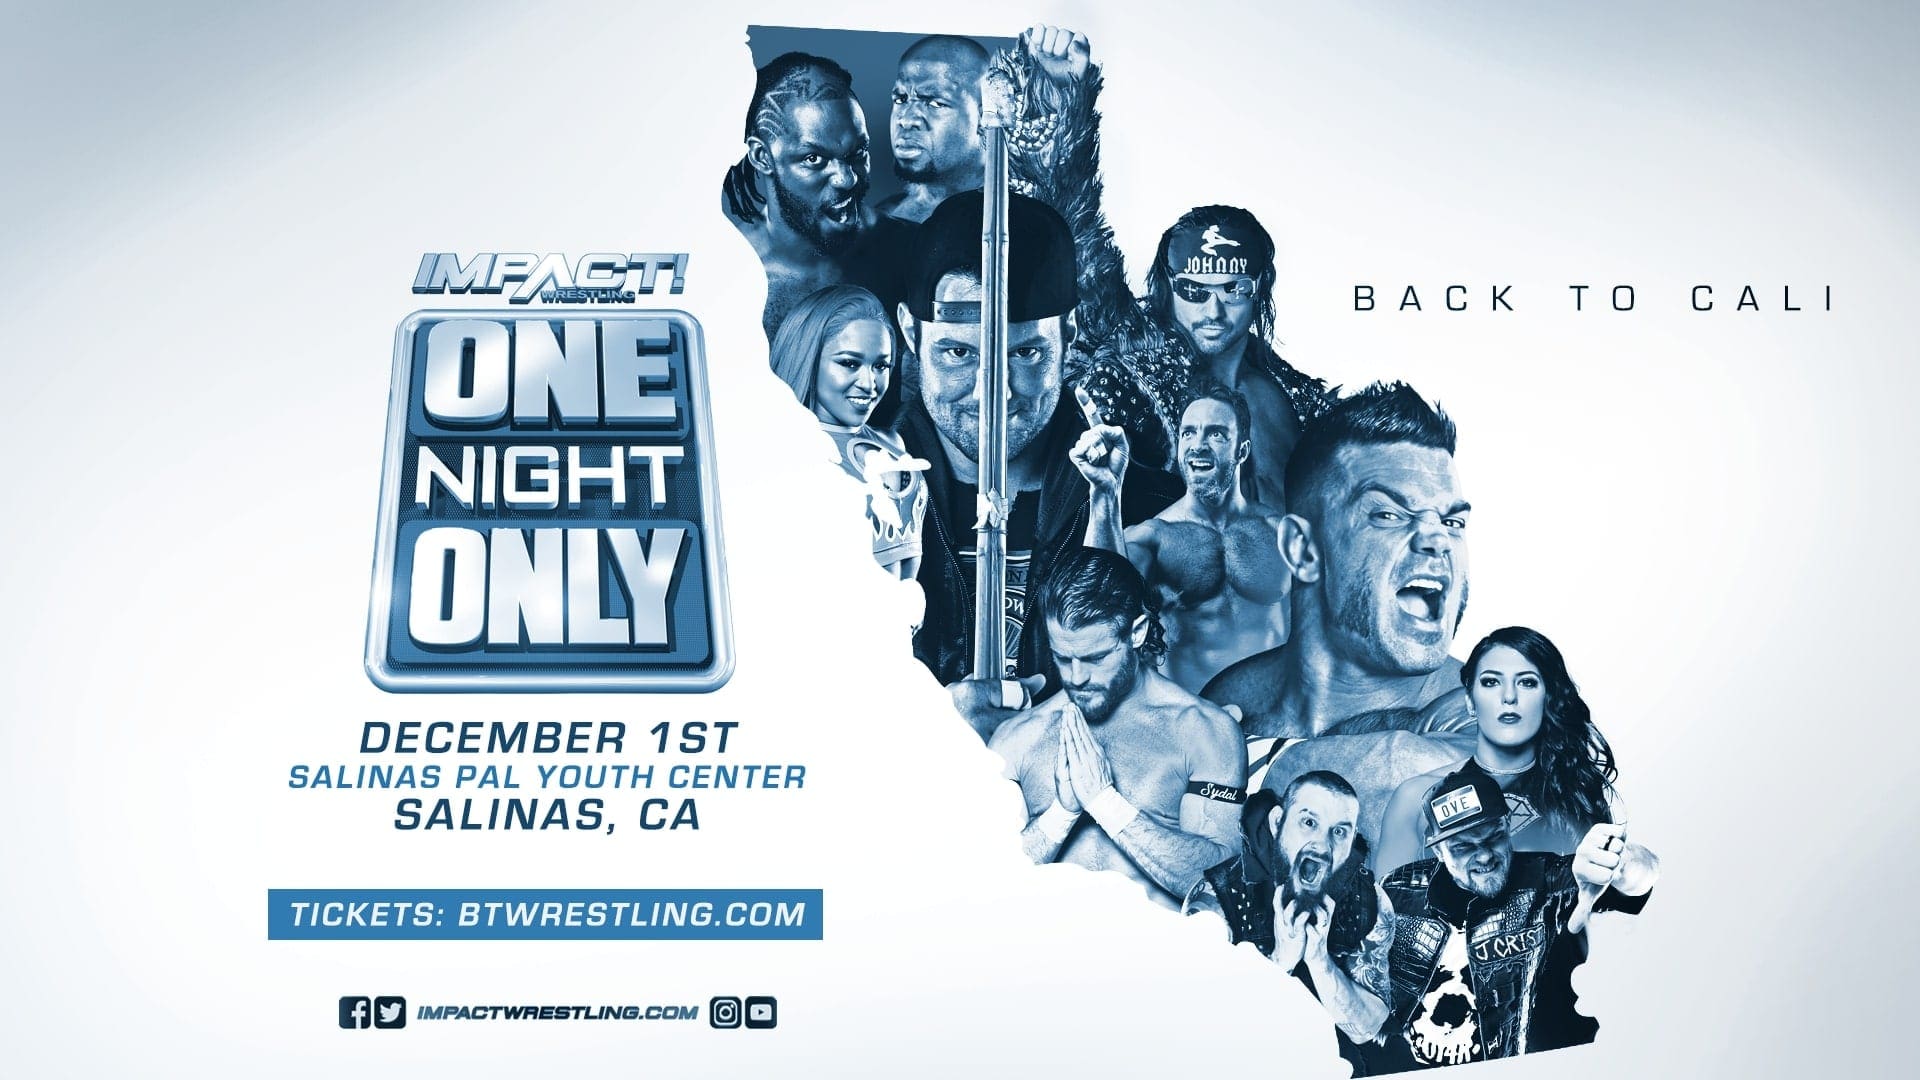 What to Expect at Tonight’s Impact Wrestling ‘One Night Only: Back to Cali’ Event